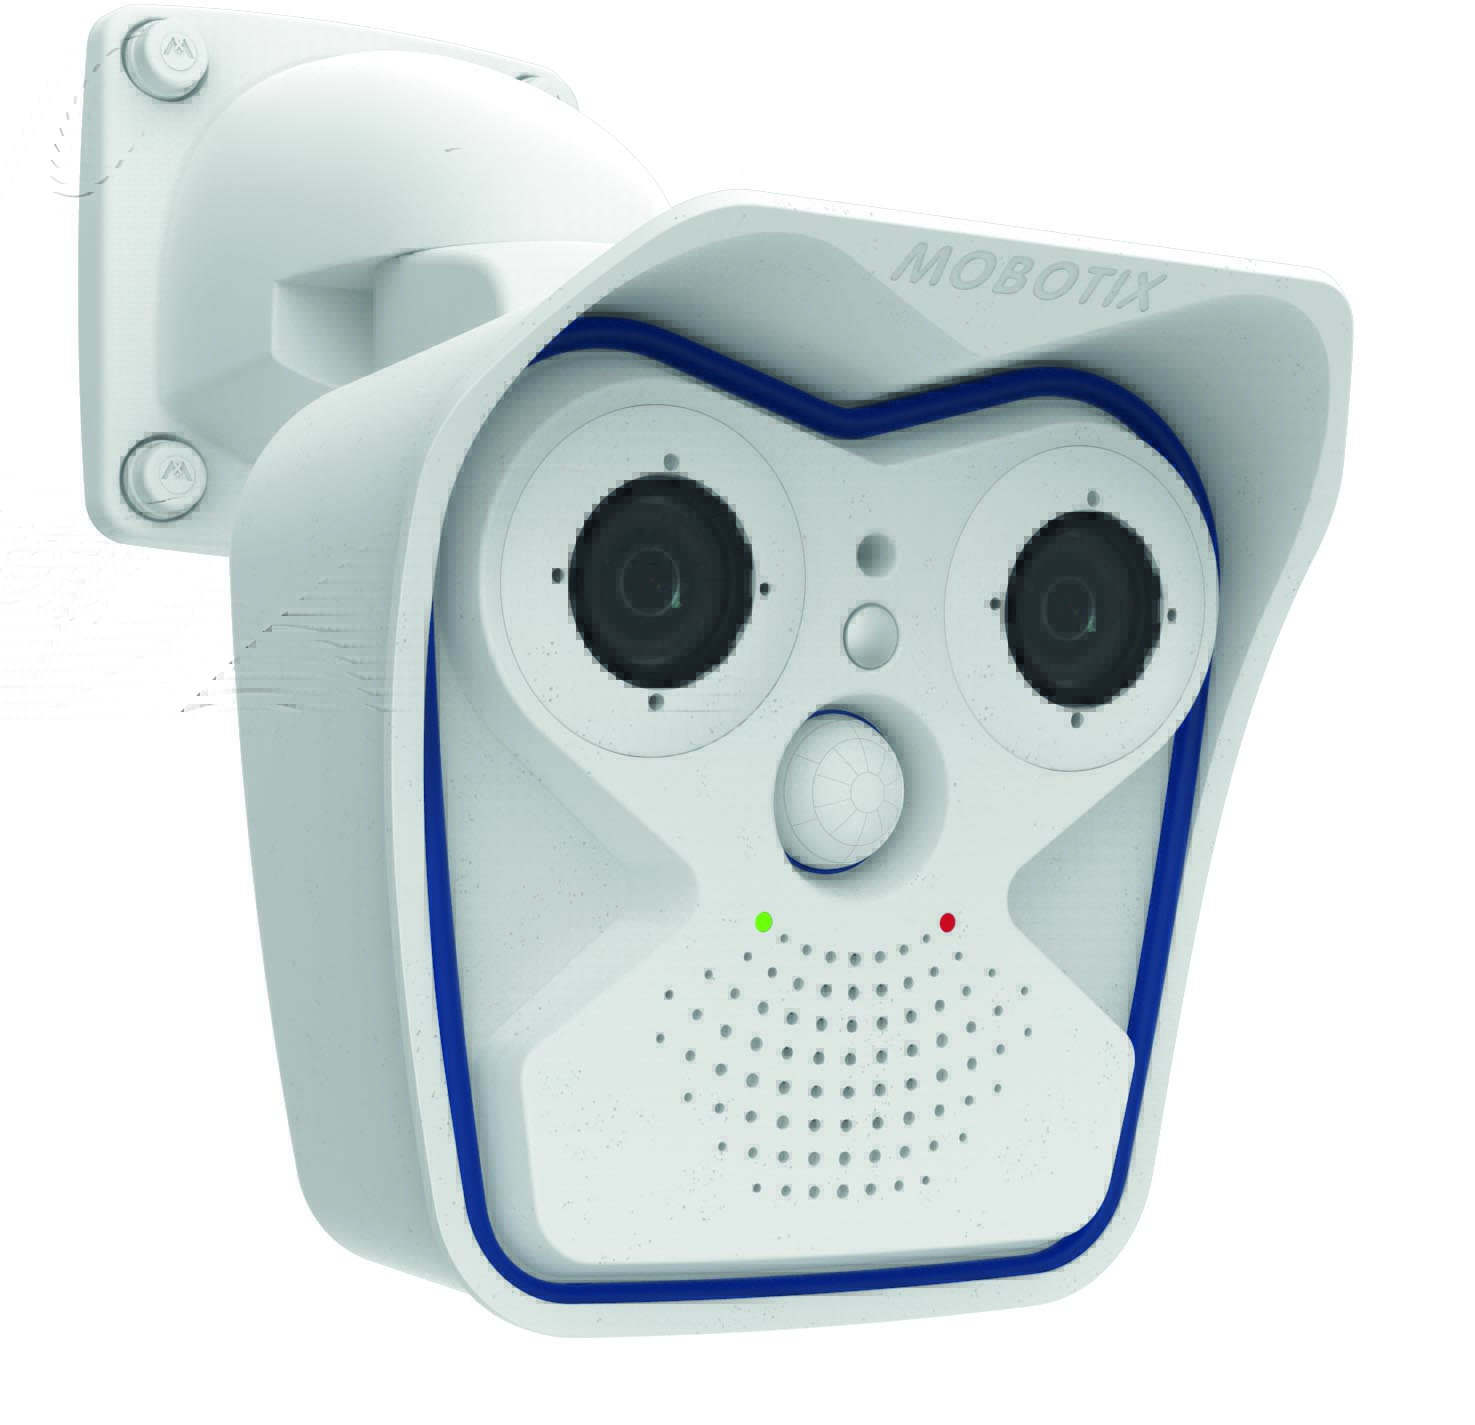 The Return to Work program combines Konica Minolta’s proprietary software and workflow solutions through its Enterprise Content Management (ECM) business with its MOBOTIX Thermal TR cameras, which have recently been deployed at hospitals to help frontline healthcare workers assess patient symptoms faster.